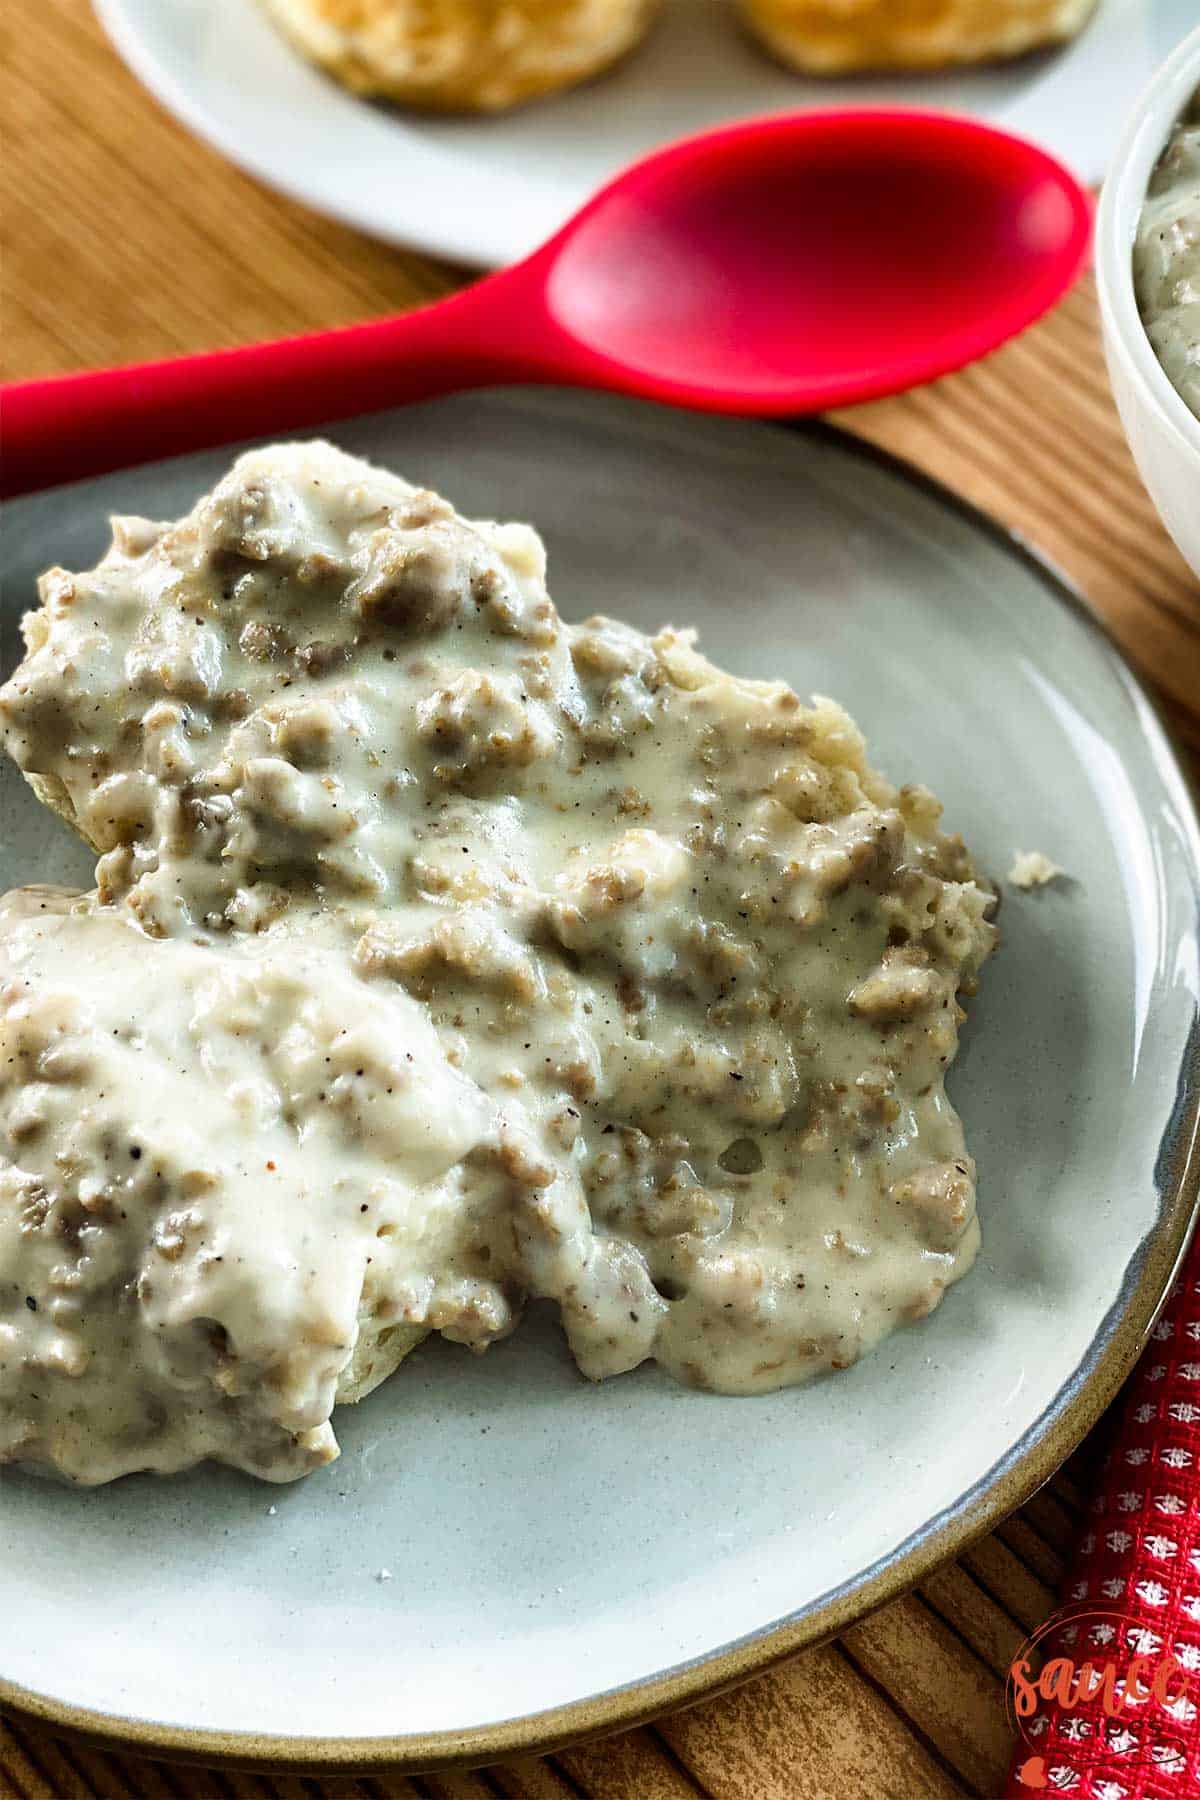 Biscuits and gravy on a plate with a red spoon